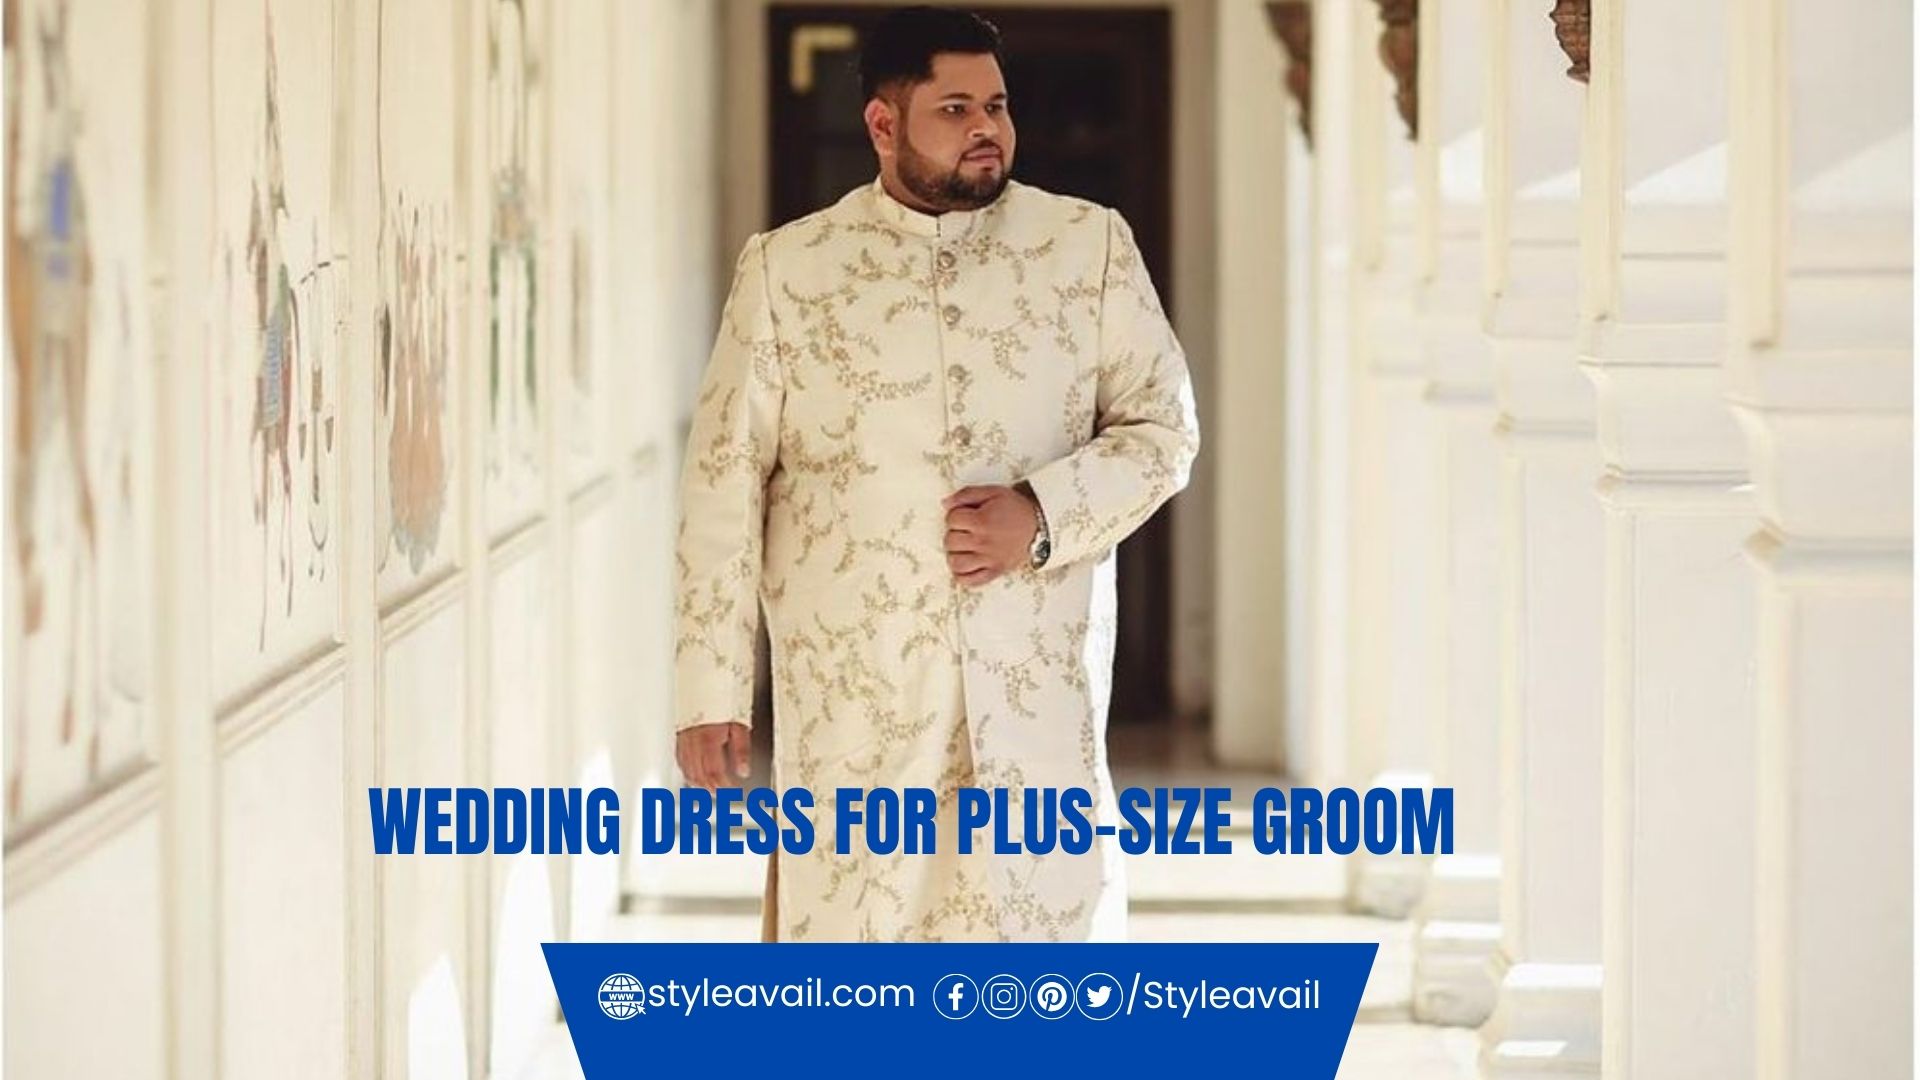 Wedding Dress for a Plus-Size Groom